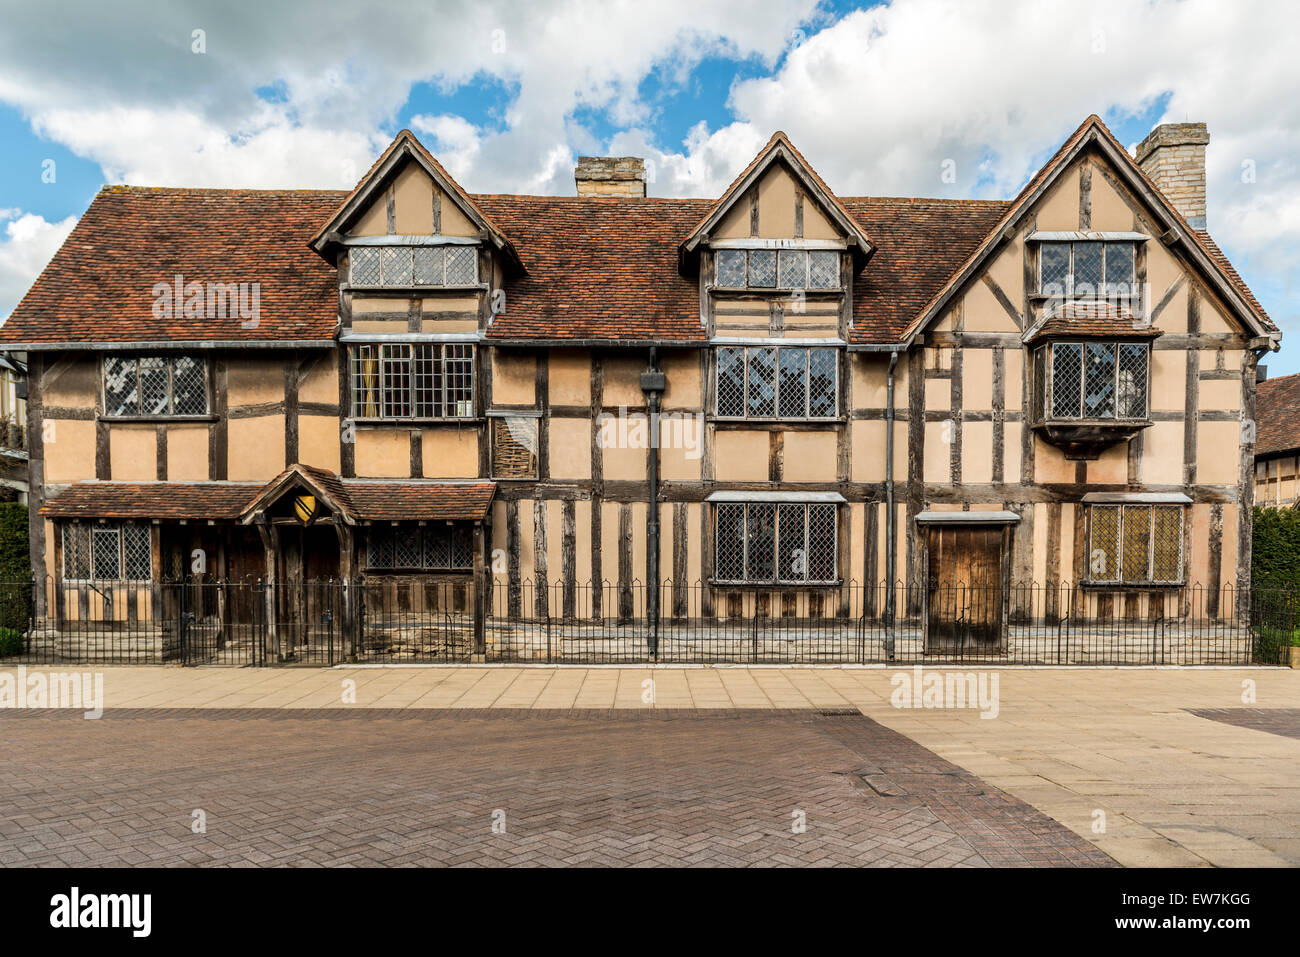 William Shakespeare's birthplace in Stratford upon Avon Stock Photo